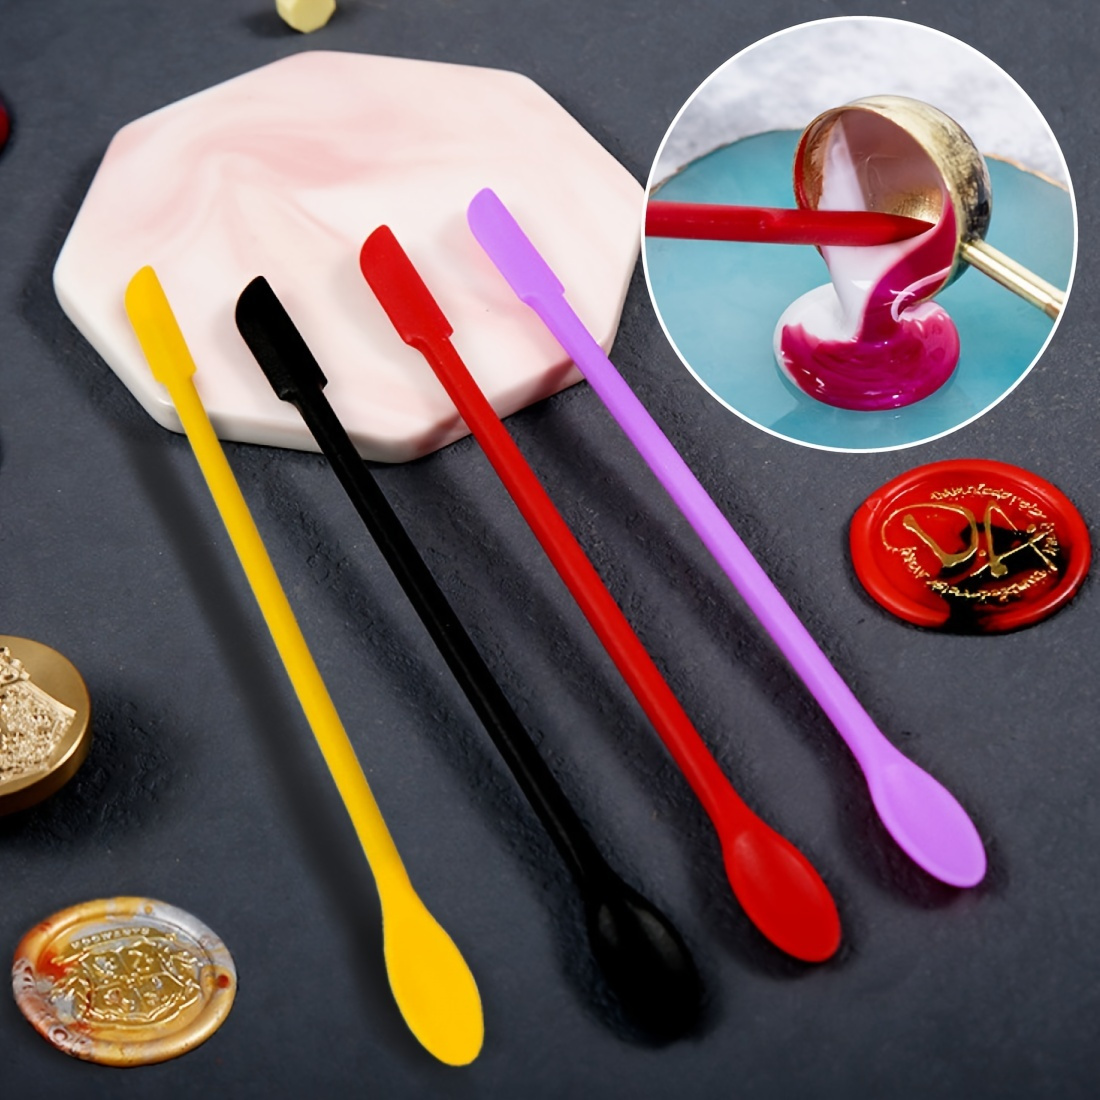  11 Pcs Silicone Resin Mold Tools Set Stirring Needle Spoon Tool  Tweezers Precision Kit, Anti-Static Electronics Tweezers Set for Resin Art  Crafts,Jewelry Making,DIY Epoxy Casting Molds(Rose Red)